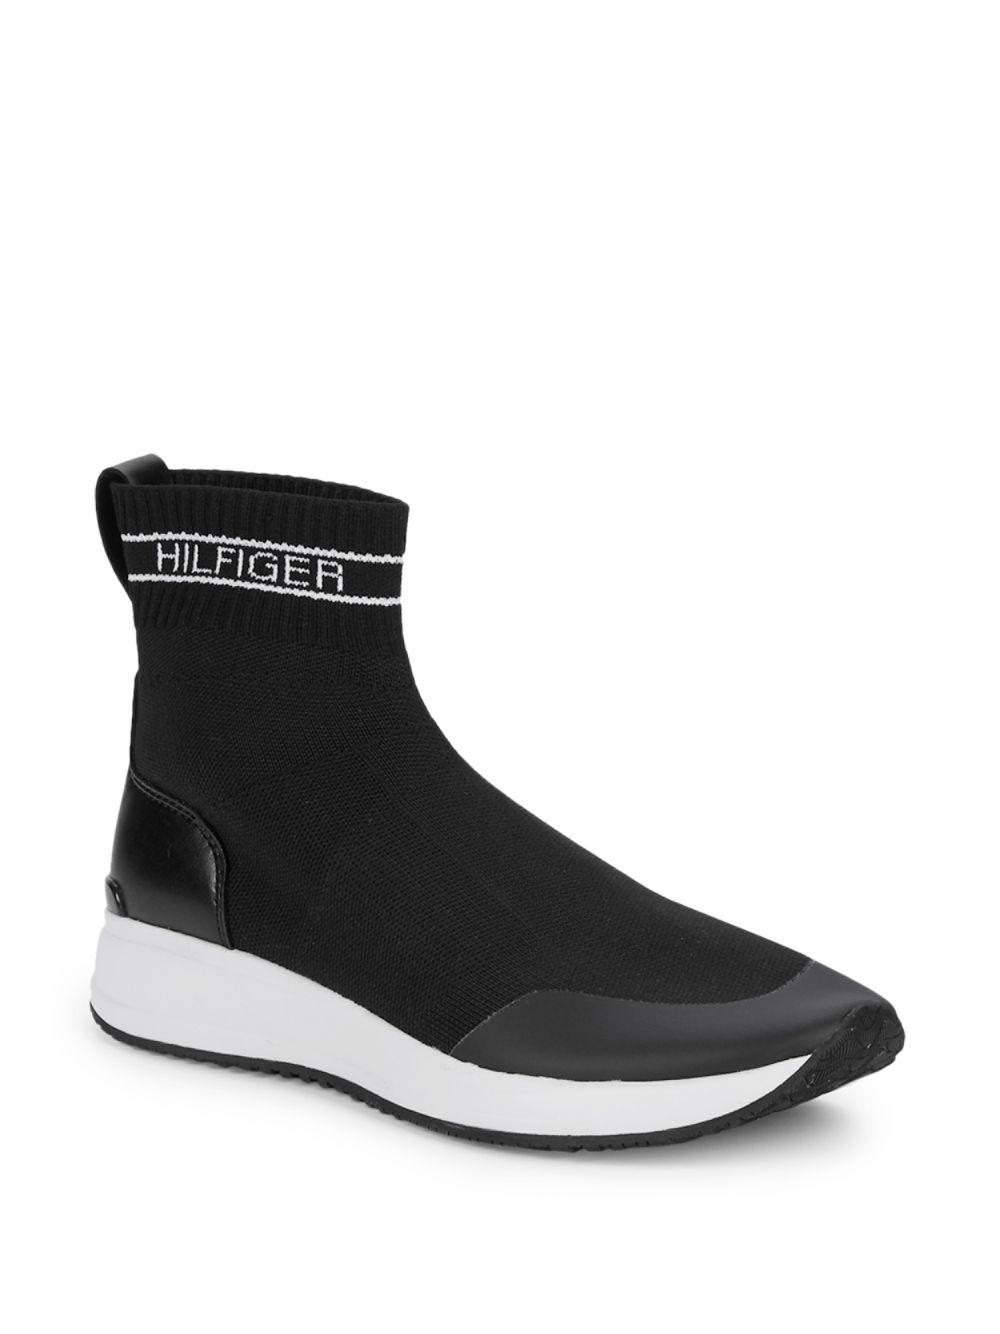 Tommy Hilfiger Reco Sock Sneakers in Black | Lyst Canada